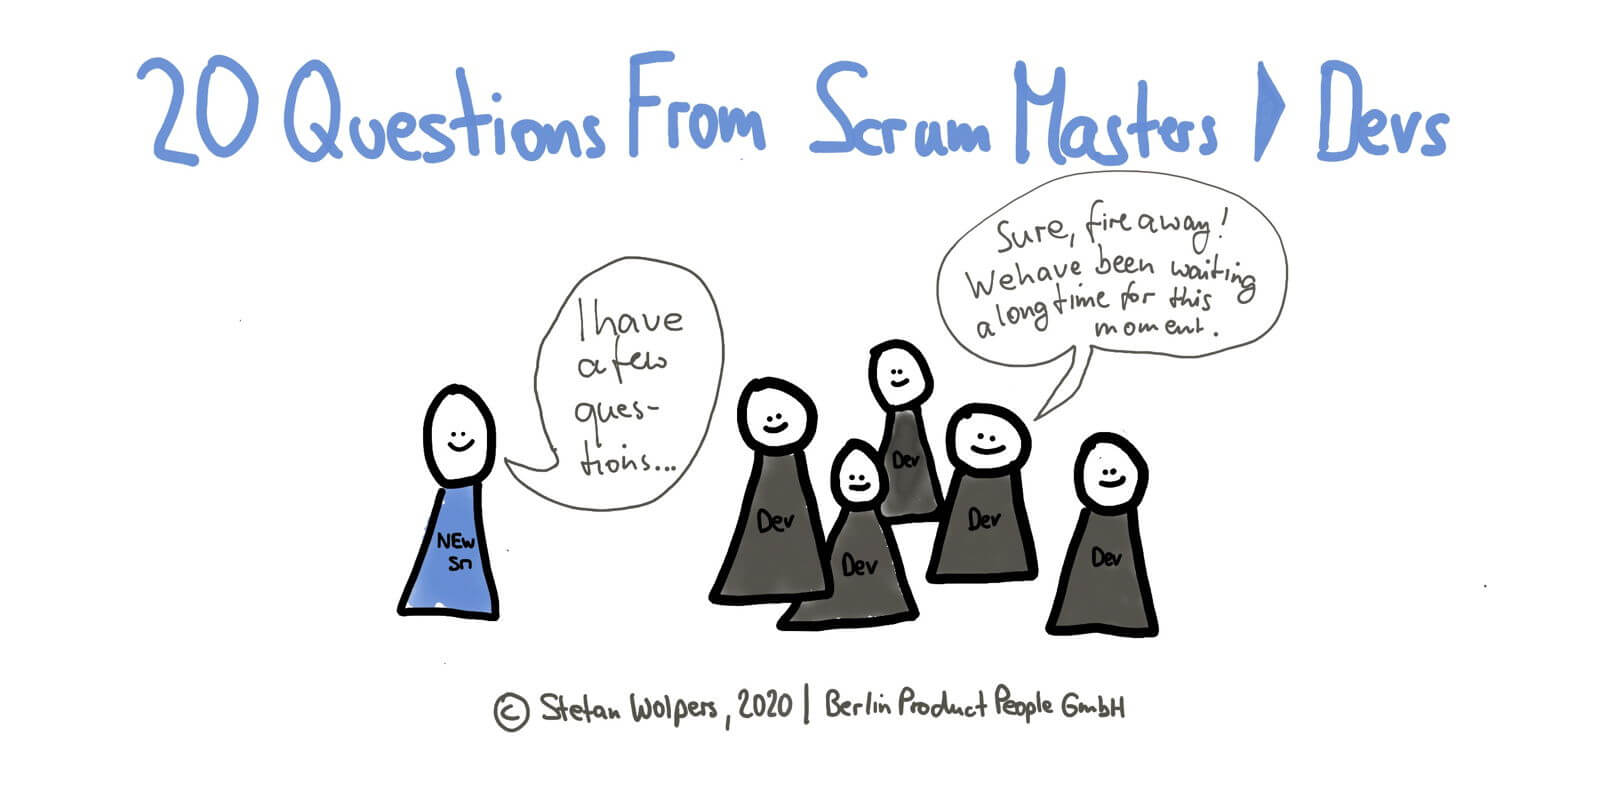 20 Questions from New Scrum Master to the Development Team — Age-of-Product.com